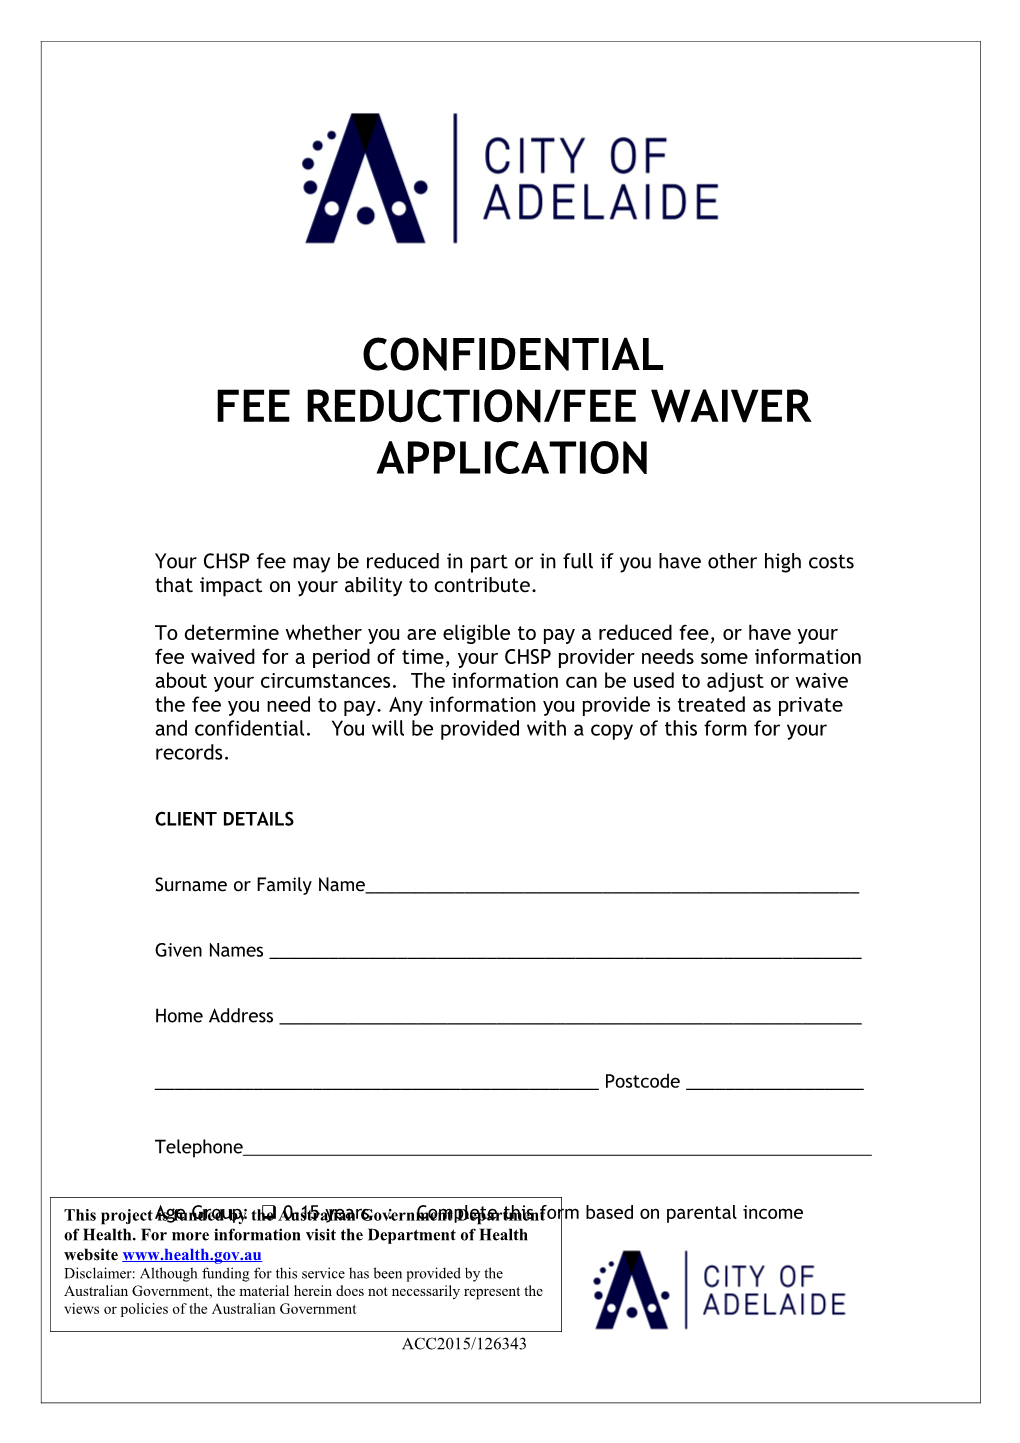 Fee Reduction/Fee Waiver Application